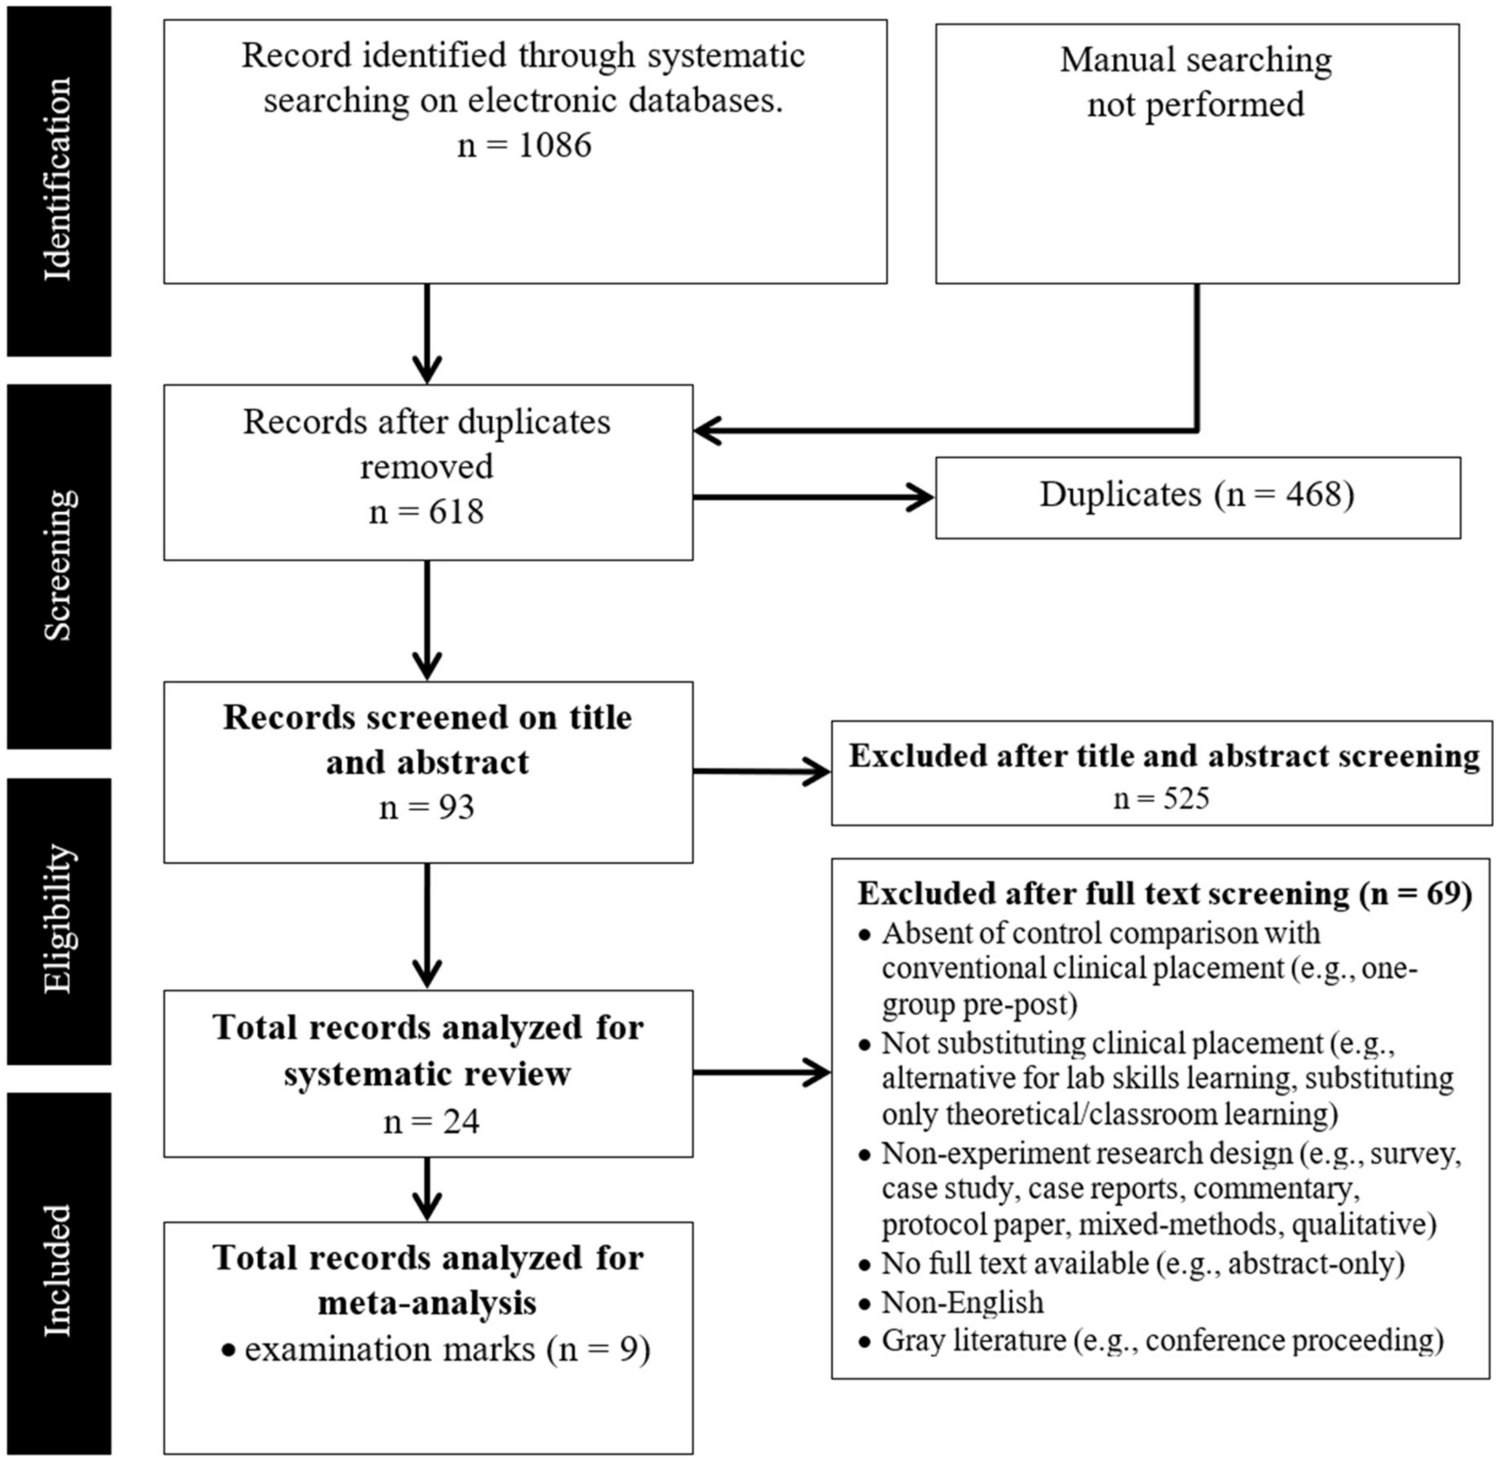 How Are Alternative Clinical Placements Performed Compared to Traditional Clinical Placements During the COVID-19 Pandemic? Sought Through a Systematic Review and Meta-Analysis